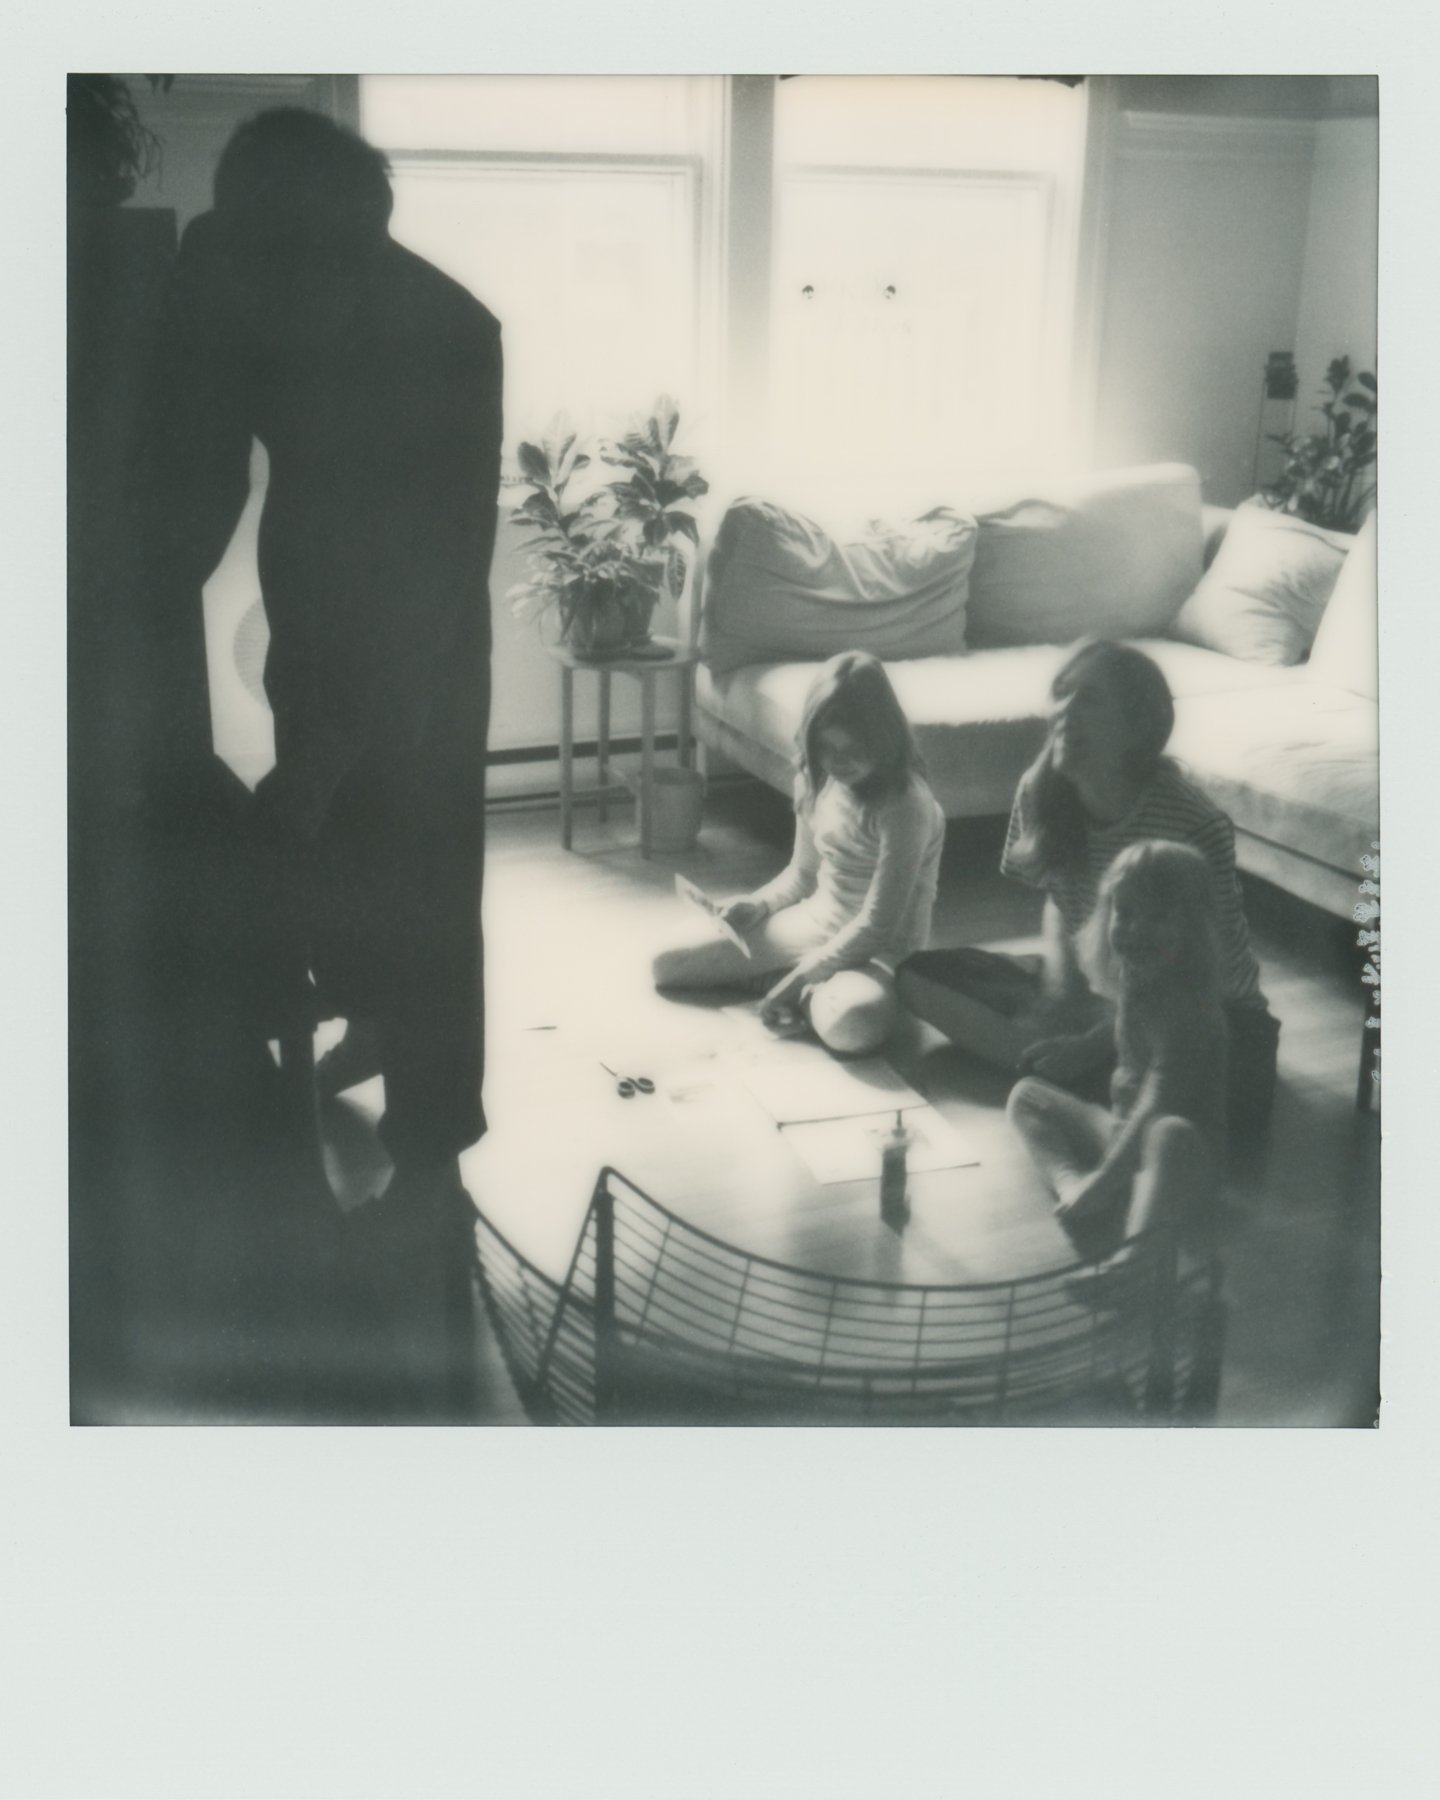 seance-photo-analogique-famille-photographe-film-et-super-8-a-montreal-marianne-charland-86.jpg (copie)